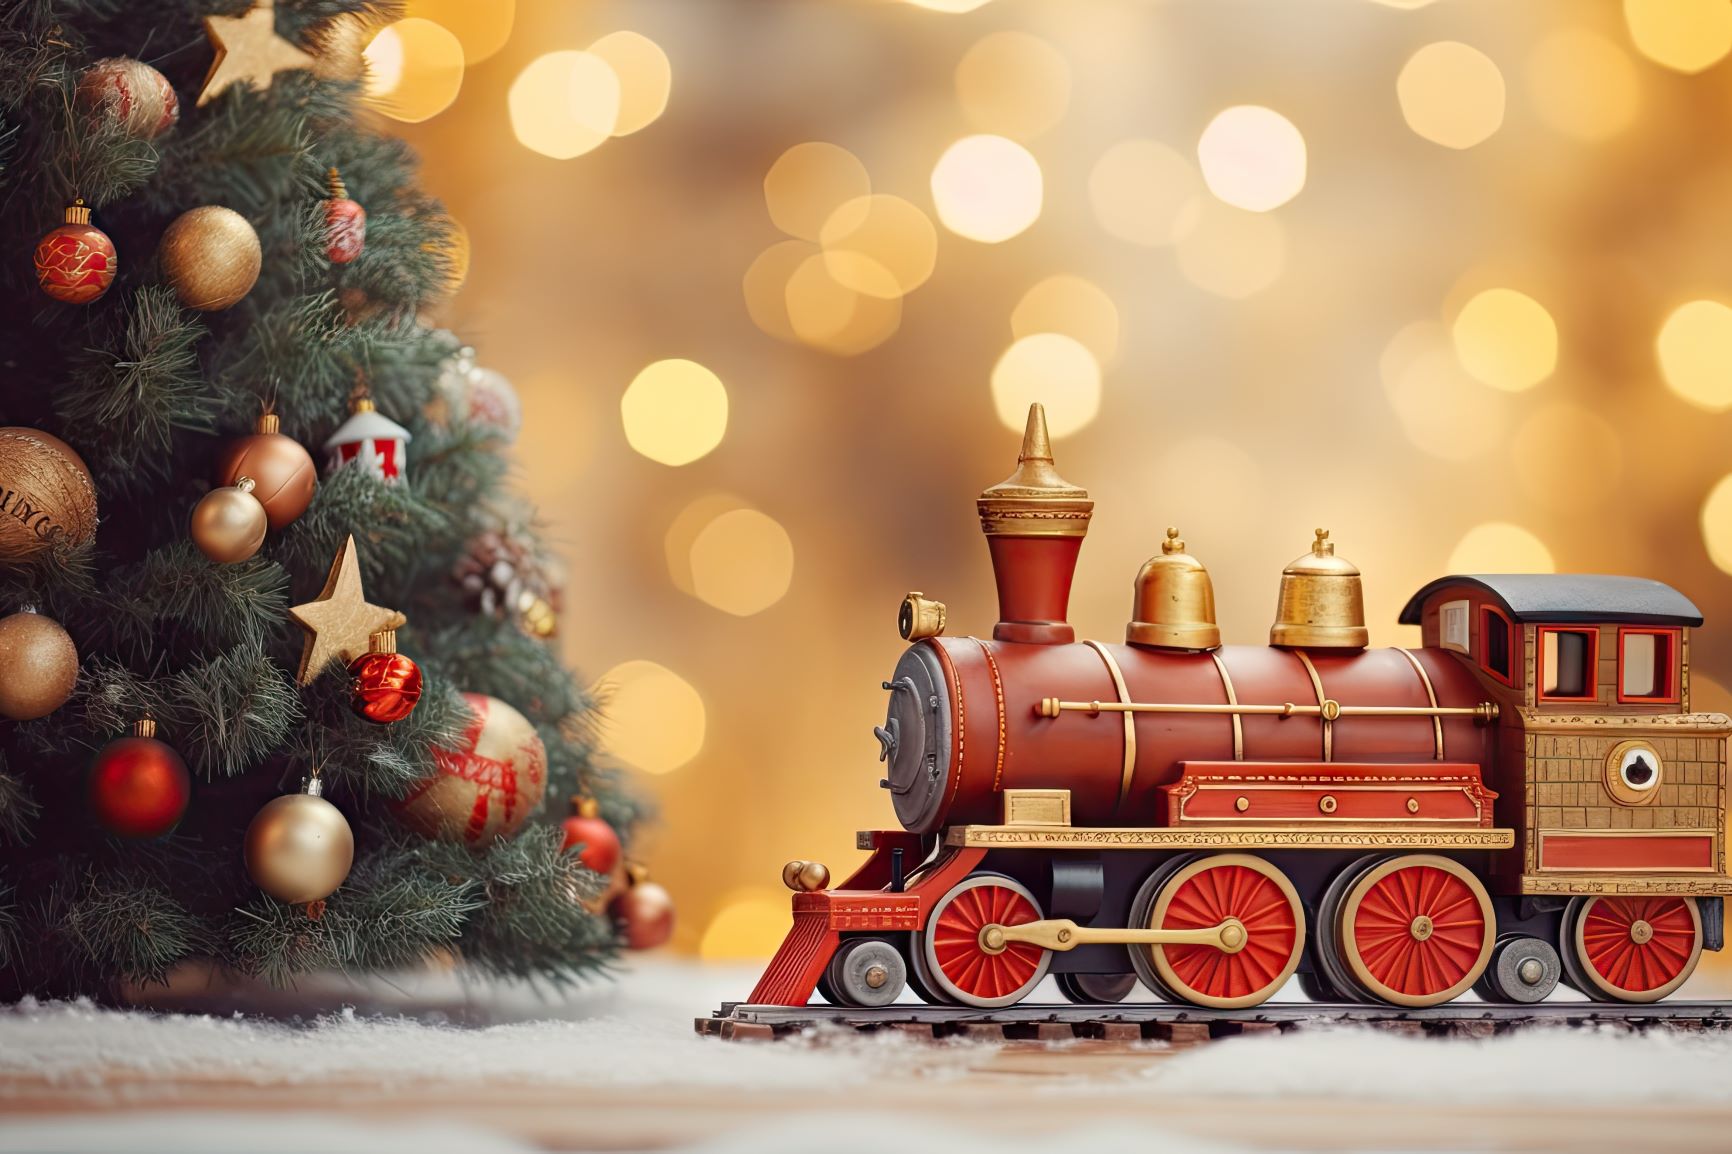 Christmas train featured